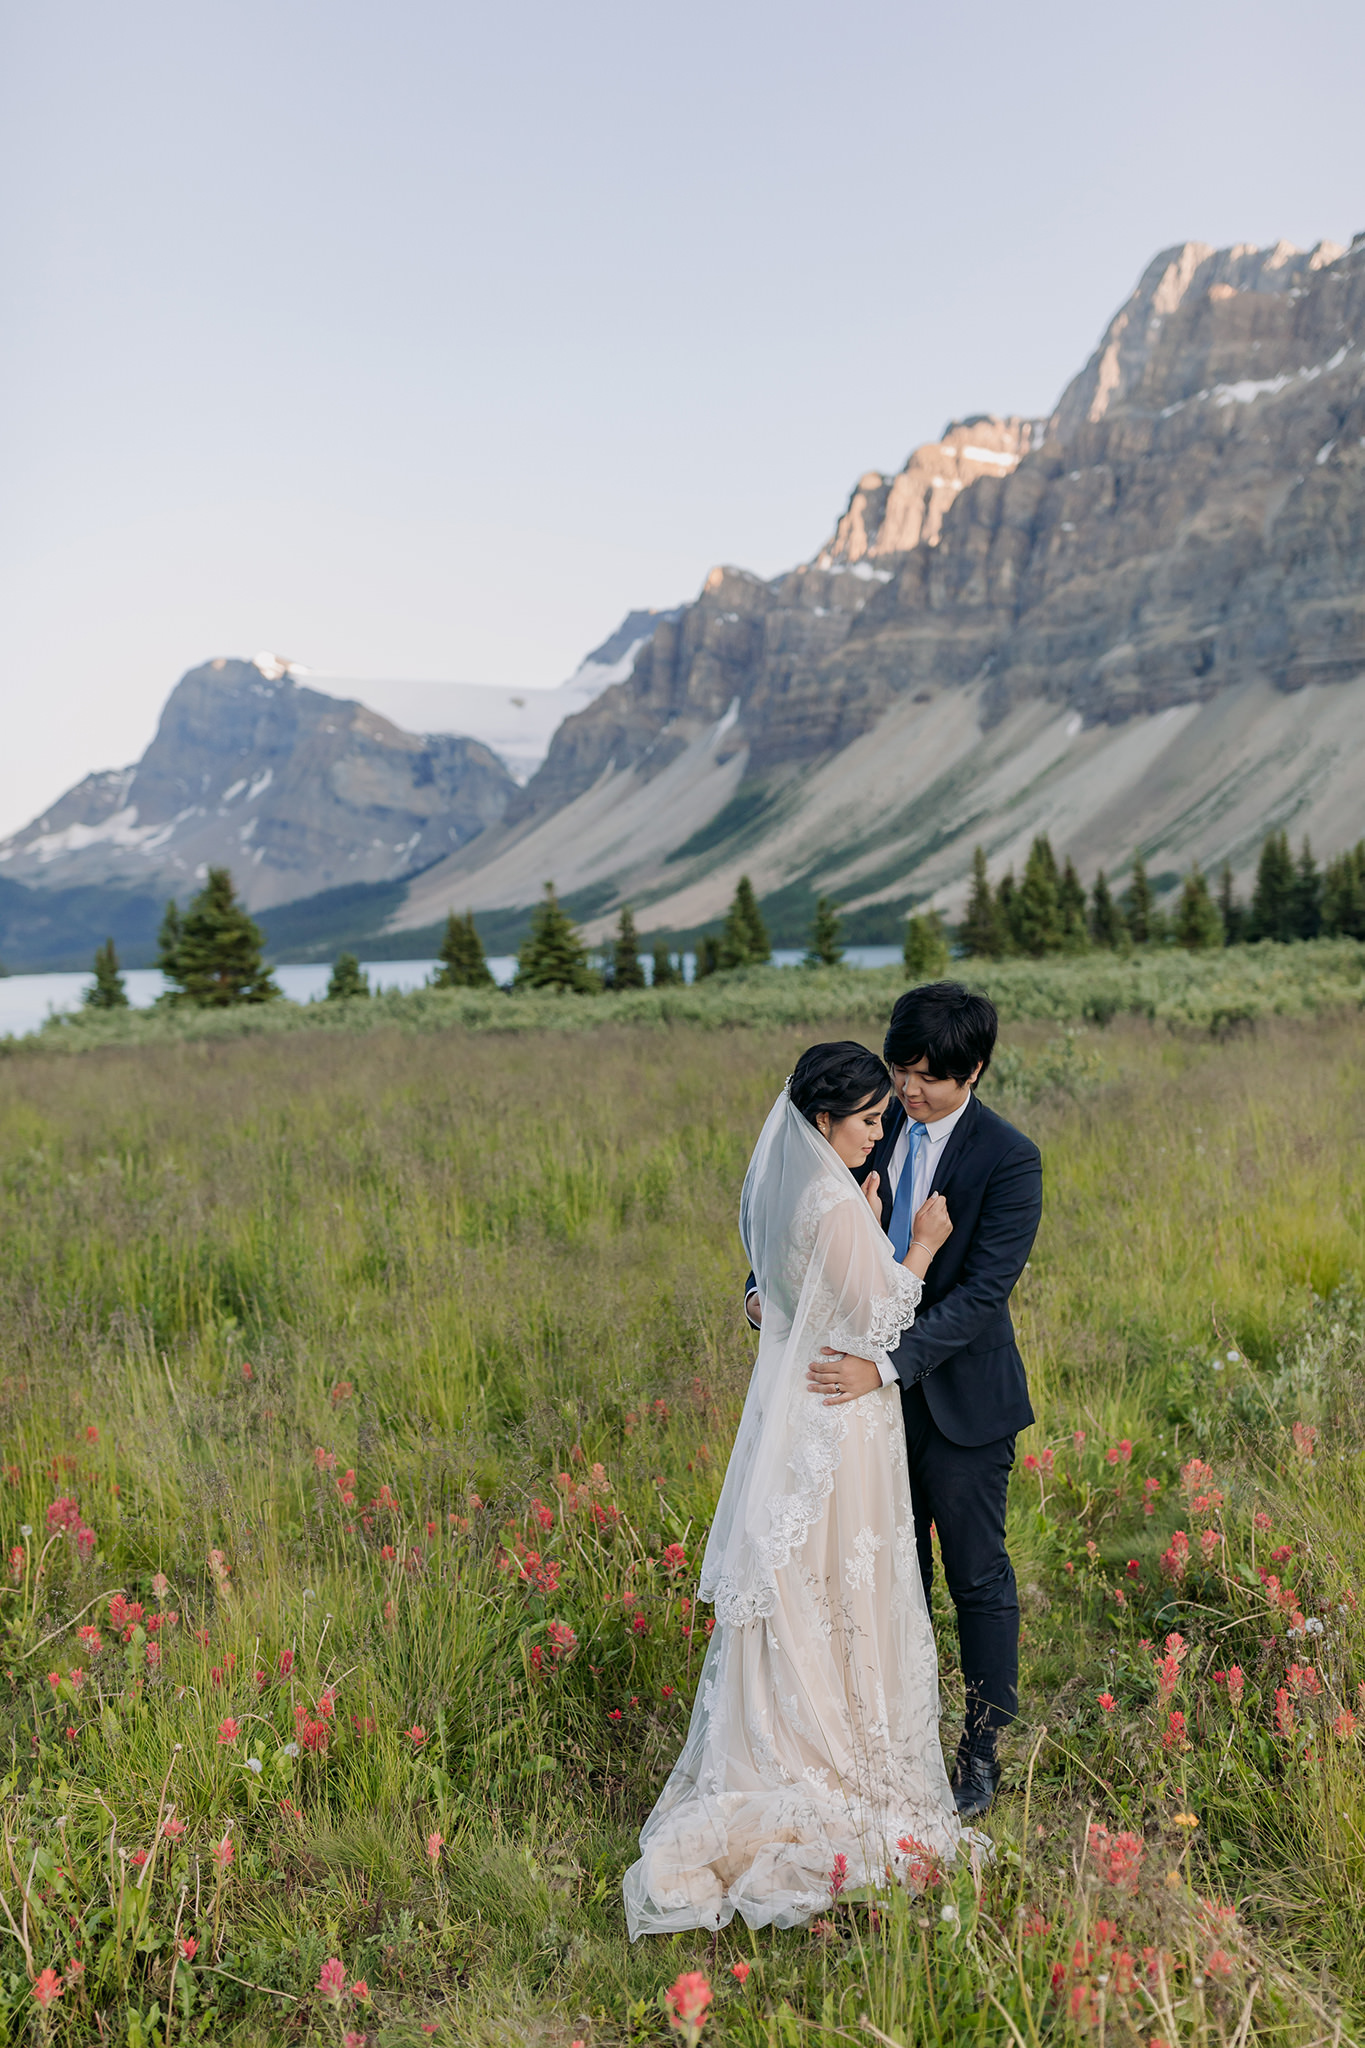 Rocky Mountain wedding tour bride groom portraits at Bow Lake on Icefields near sunset in Banff National Park photographed by mountain elopement specialist ENV Photography